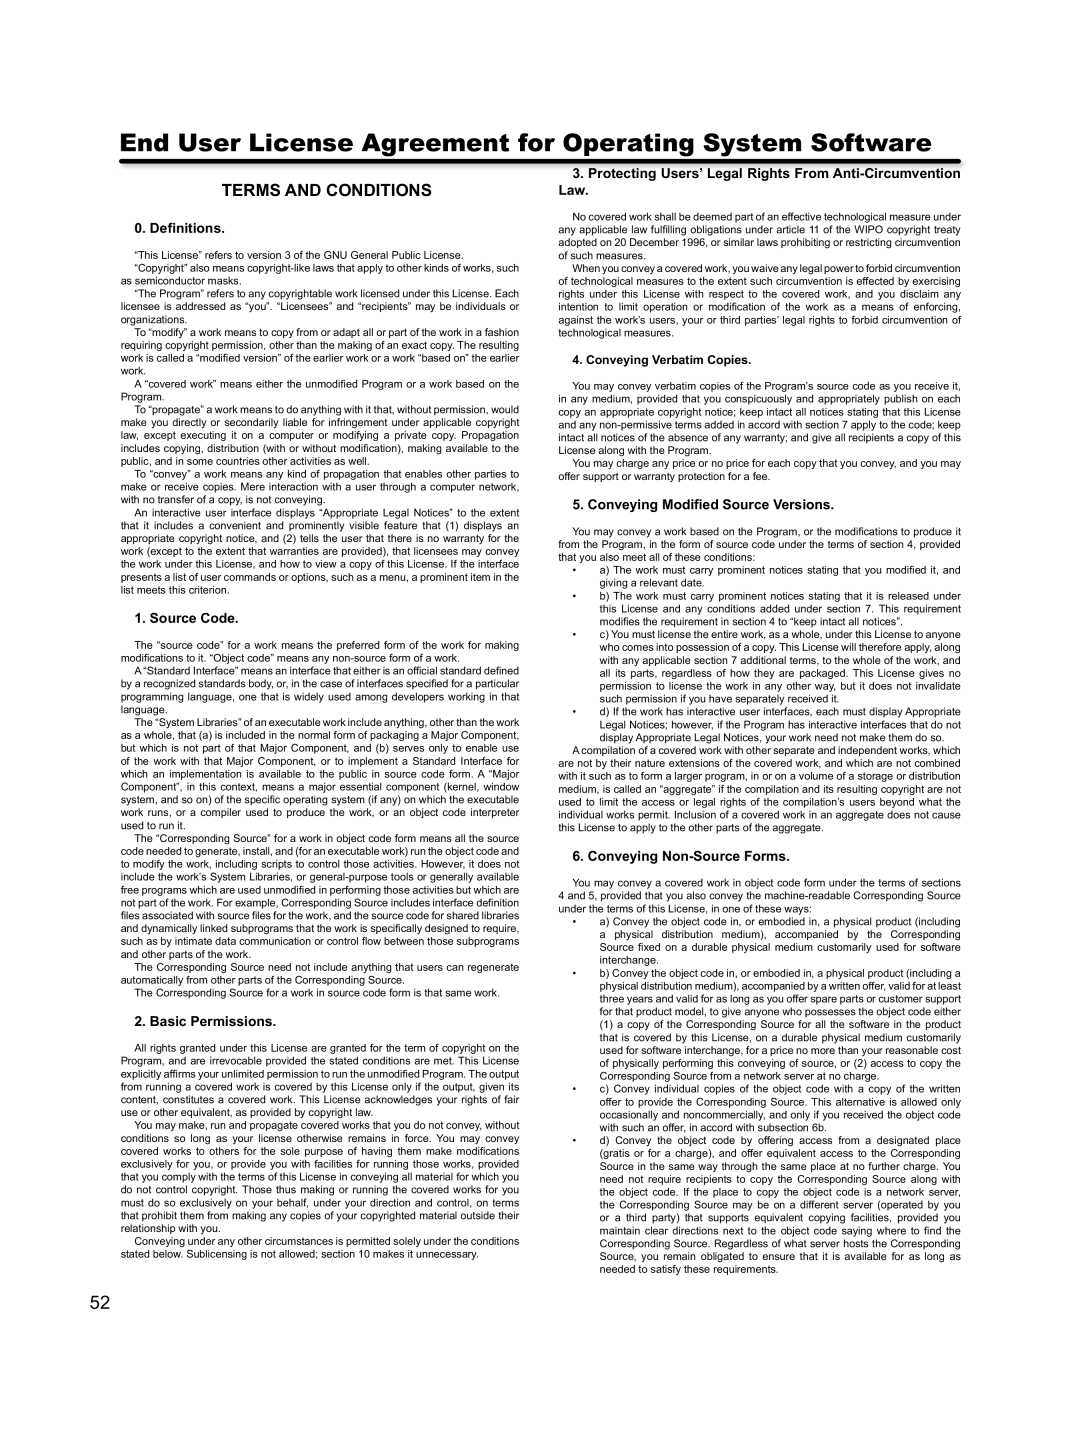 Hitachi L46S603 End User License Agreement for Operating System Software, Terms And Conditions, 0. Deﬁnitions, Source Code 